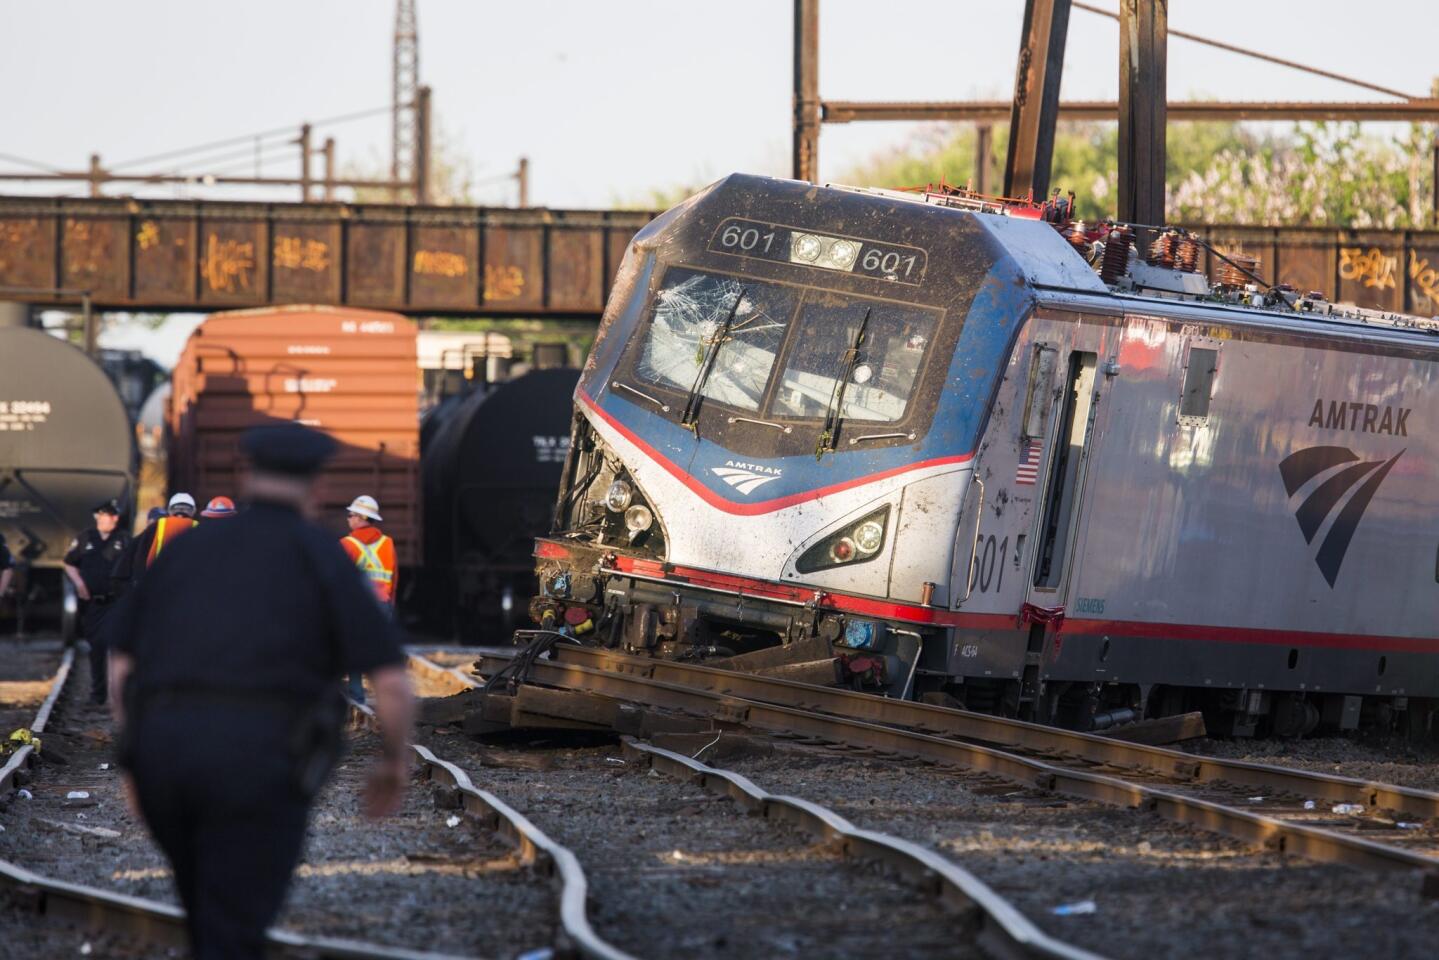 An Amtrak train that derailed on its way from Washington to New York City in Philadelphia.